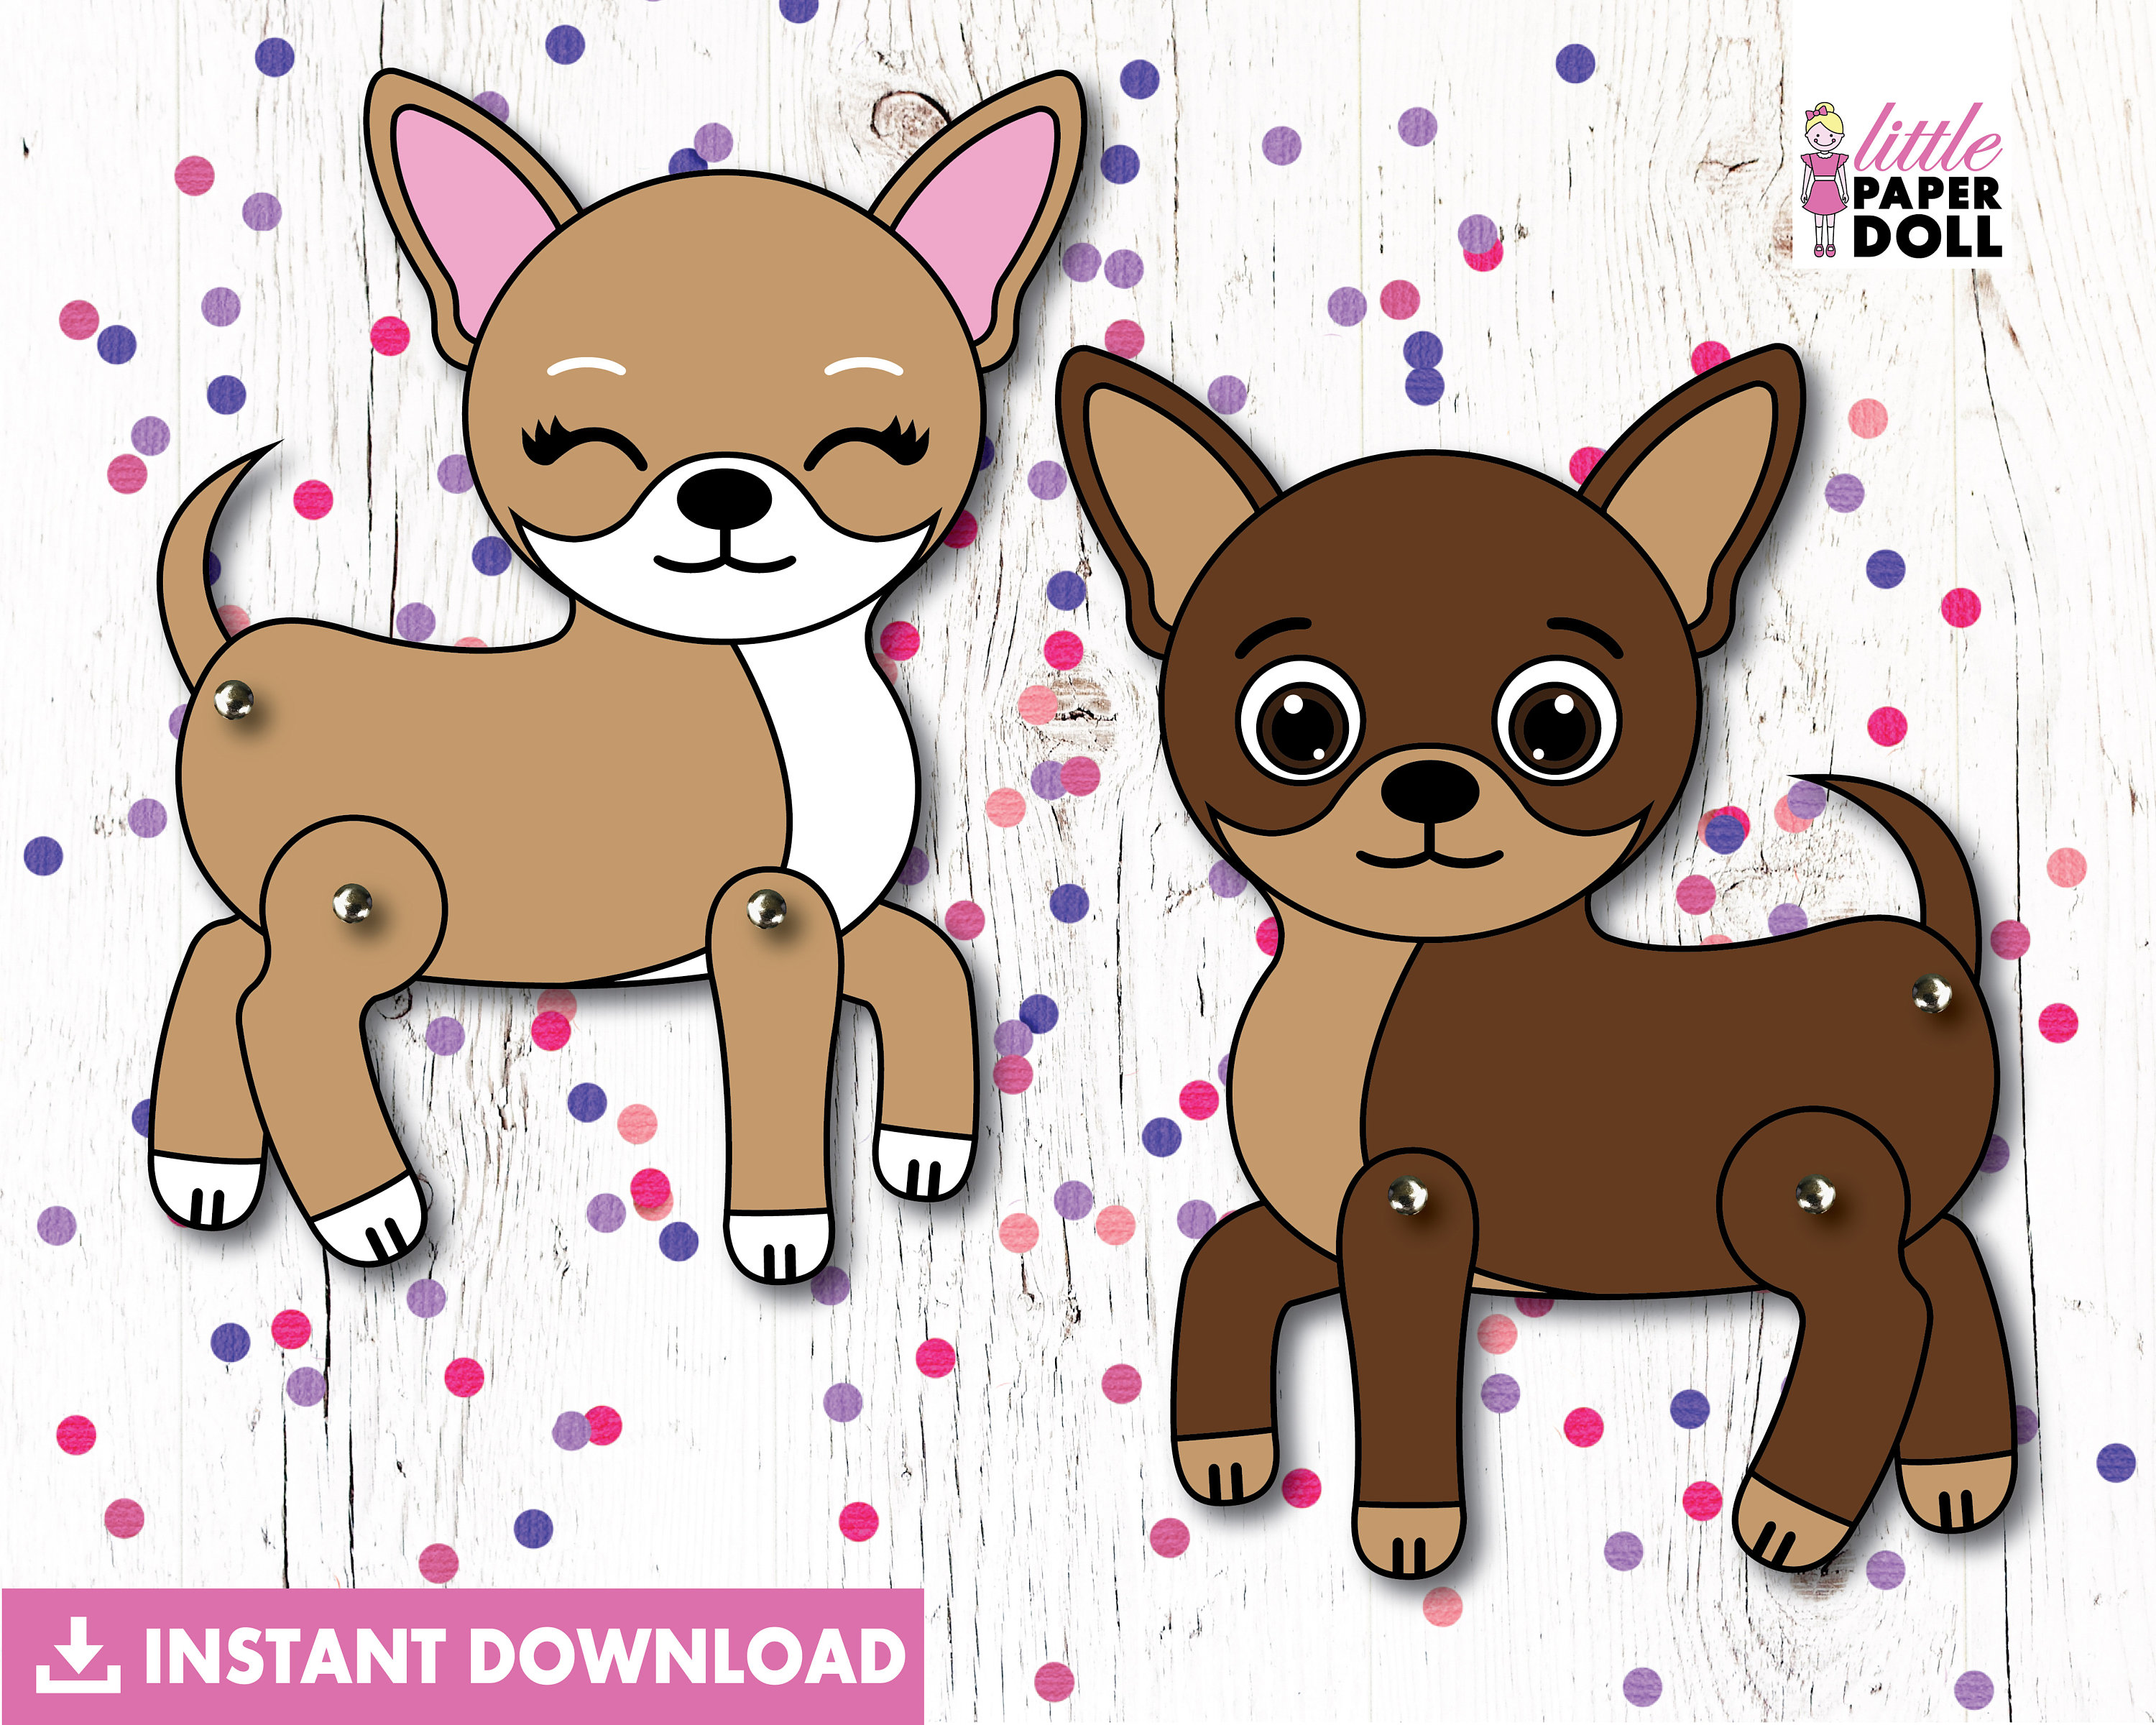 Dog paper doll instant download printable puppy dog coloring page dog birthday party activity kids craft boy chihuahua girl chihuahua